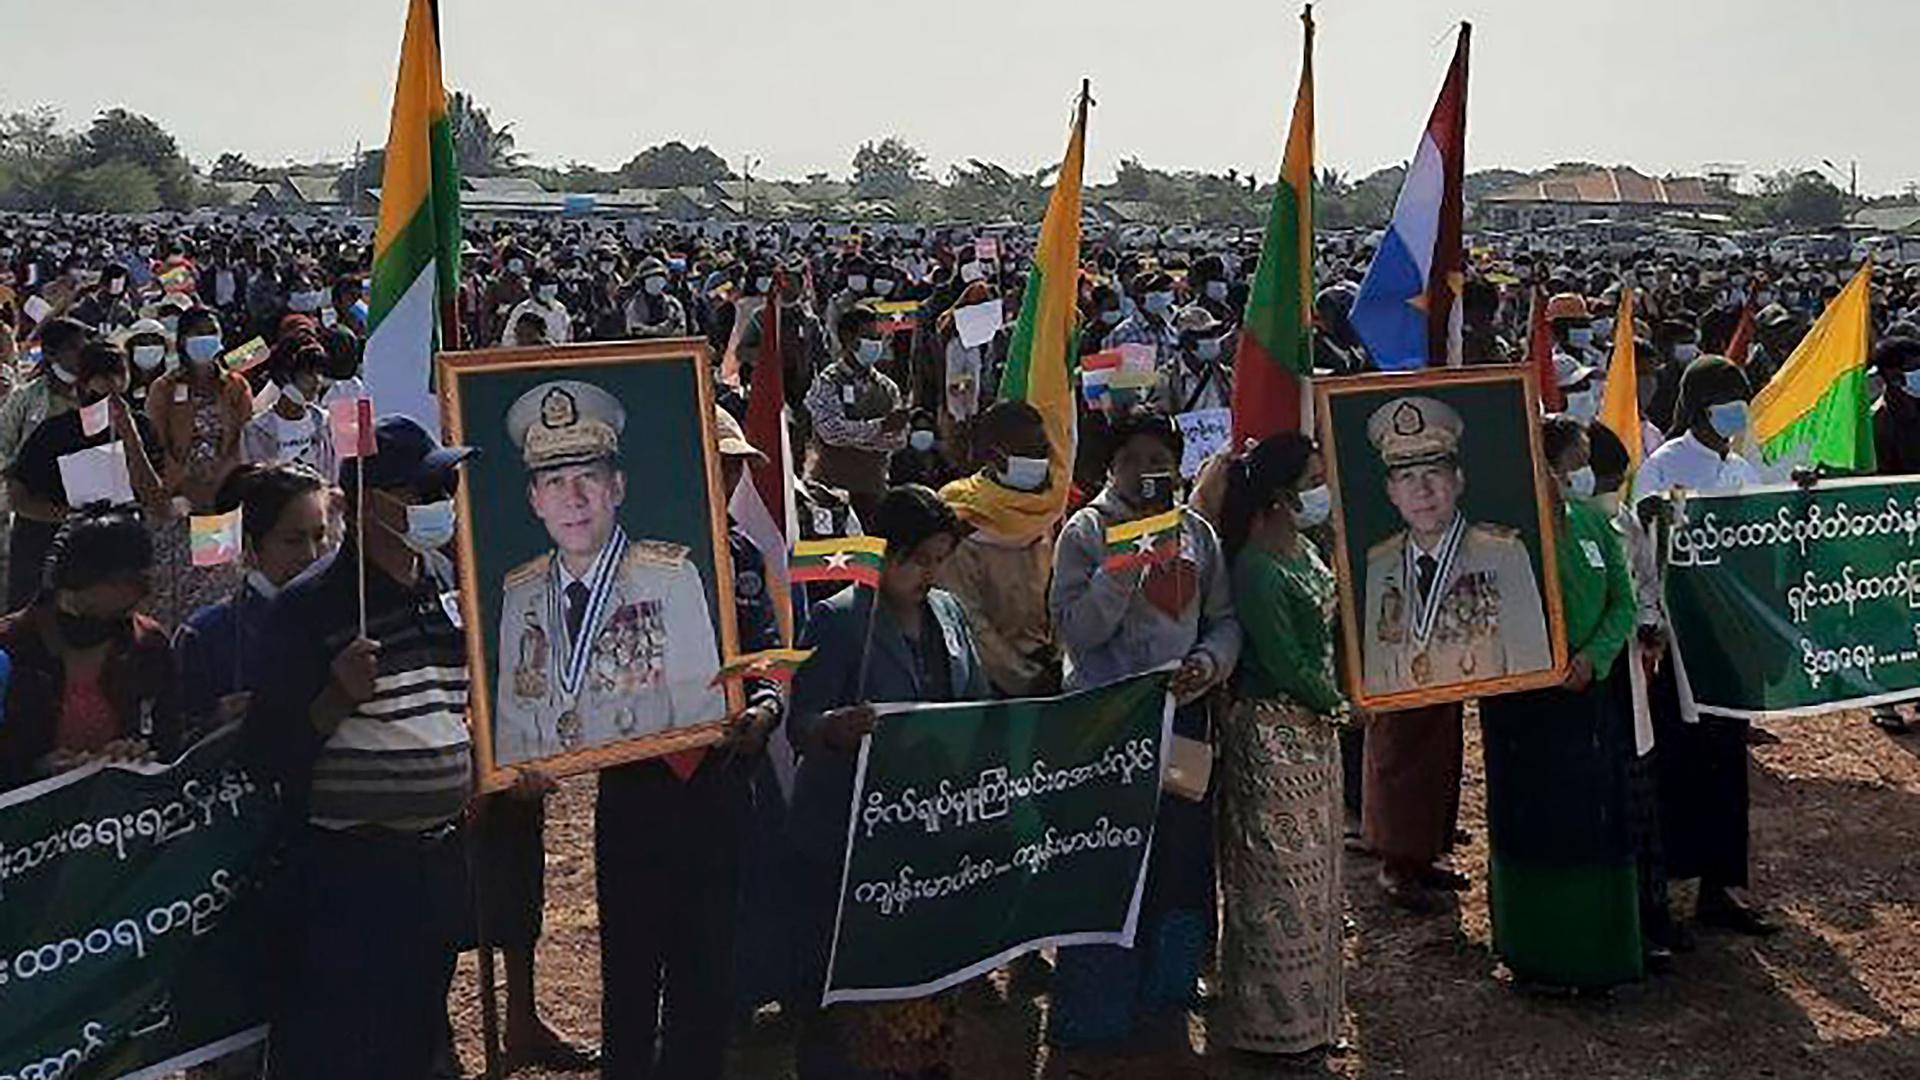 In this image provided by the Military True News Information Team, supporters of the military government hold nationalistic banners and portraits of Senior General Min Aung Hlaing, chairman of the State Administration Council.